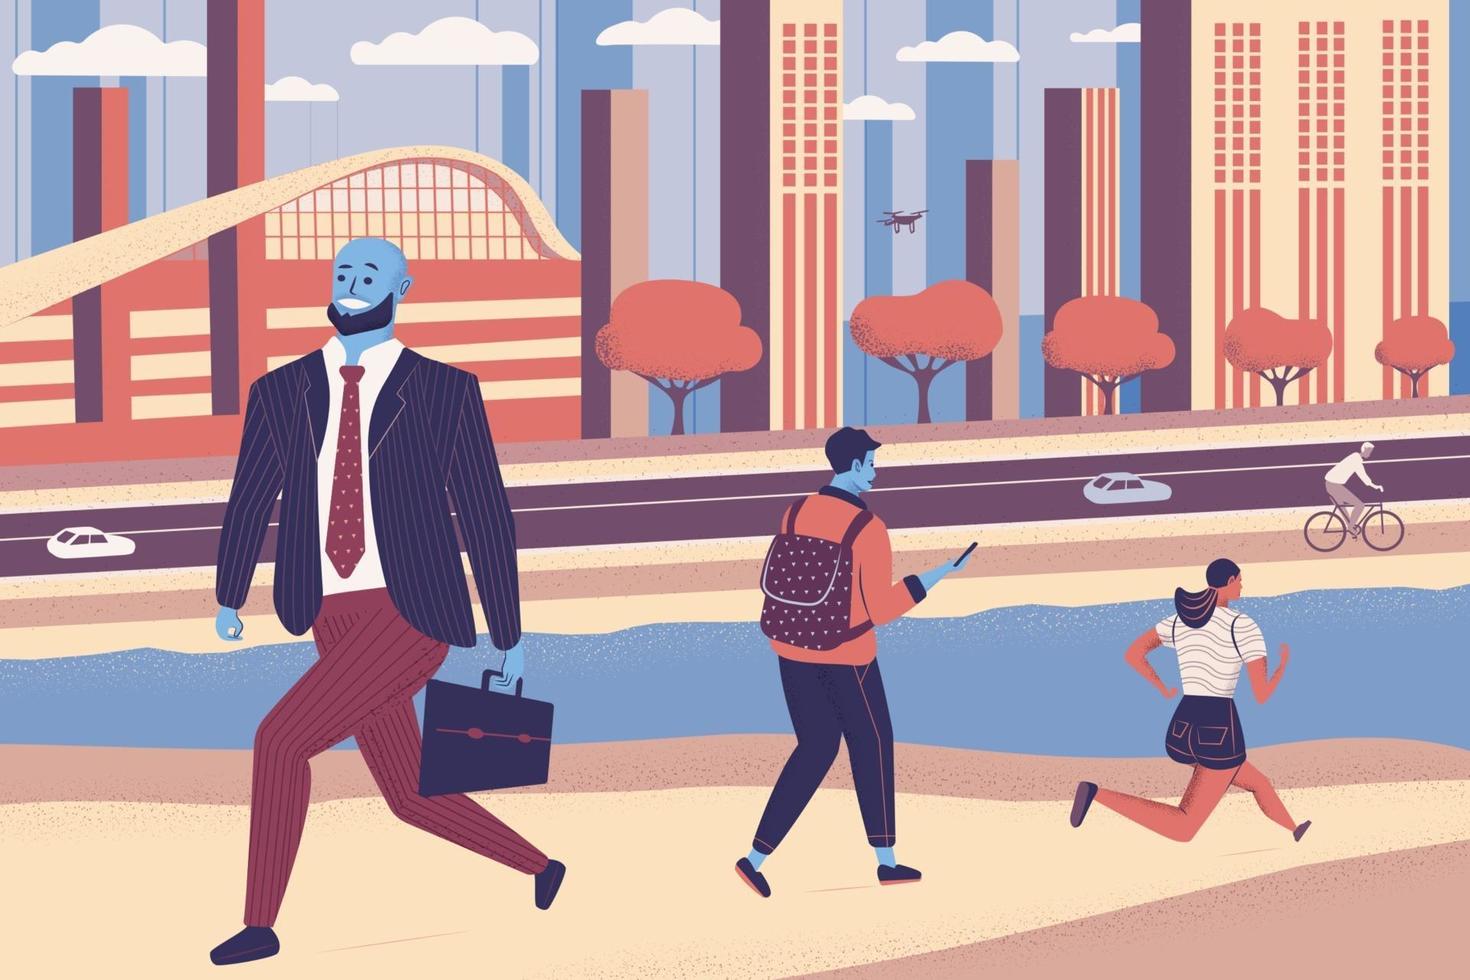 People walking on the street with cityscape background. Landscape building panorama with skyscraper. Pedestrian men and women characters and cyclist hurry to work. Cartoon flat vector illustration.